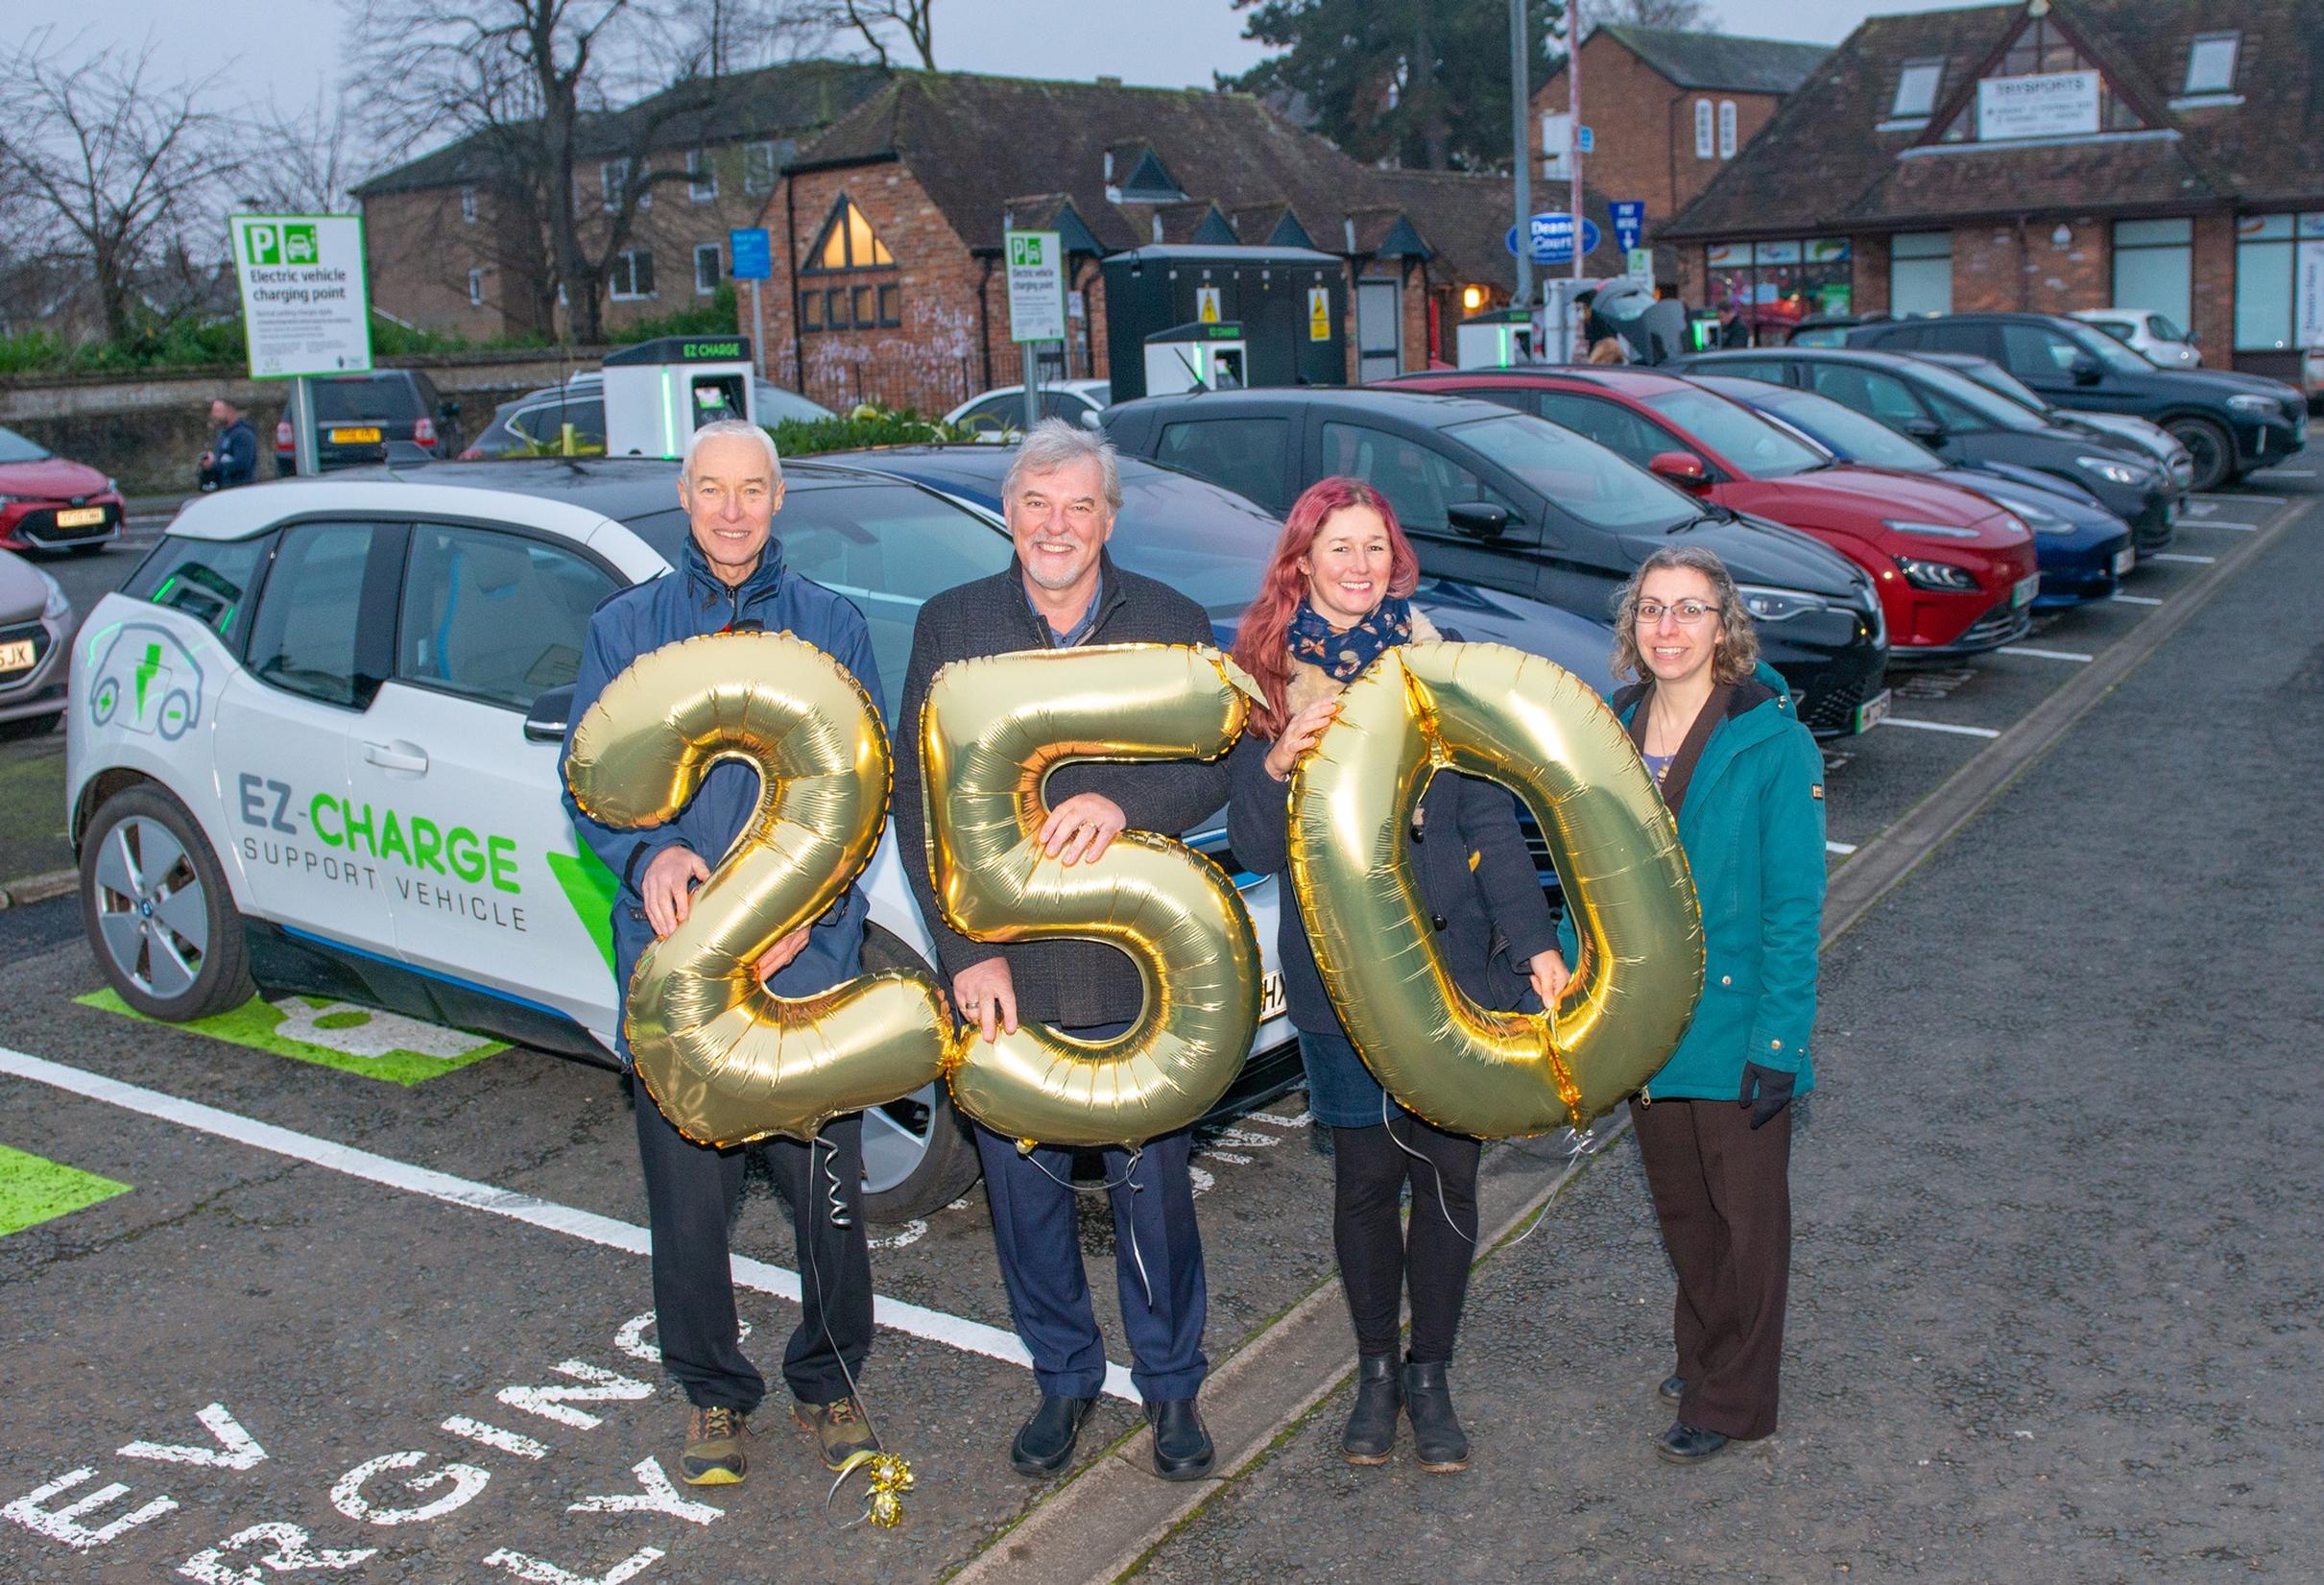 The Psrk and Charge network now includes 250 chargepoints at 20 hubs across Oxfordshire